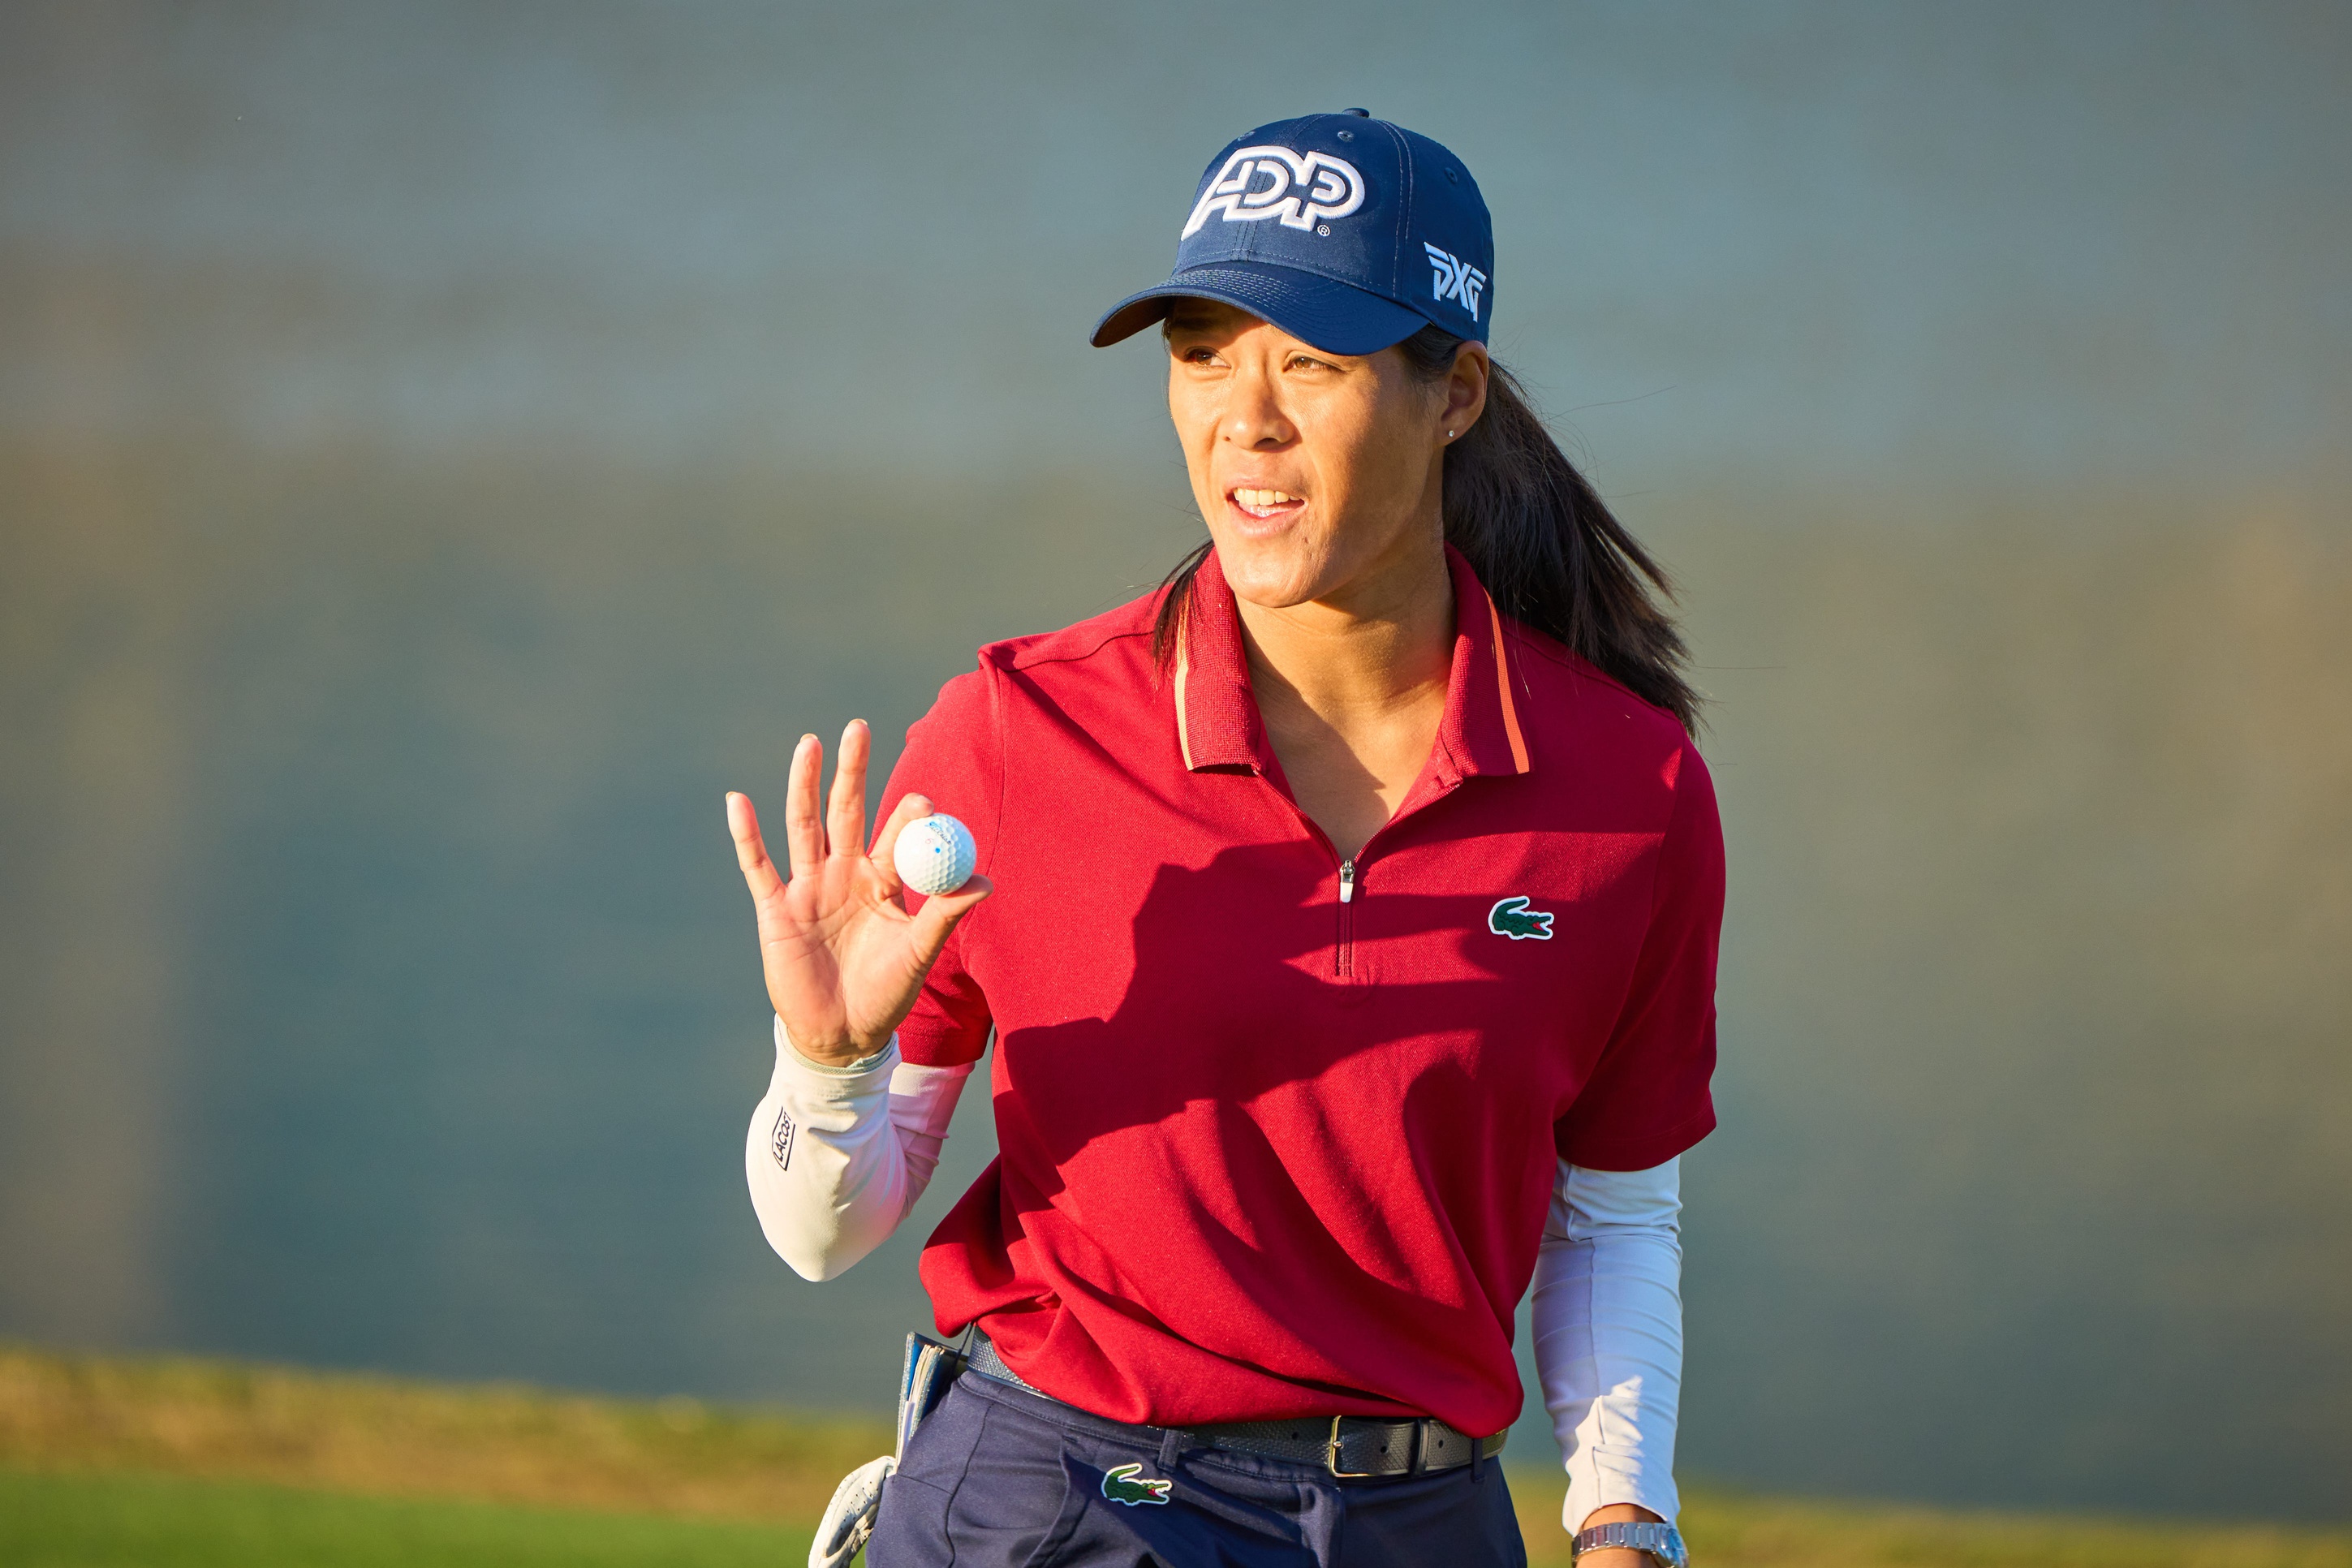 LPGA picks for the Drive on Championship with predictions Celine Boutier 